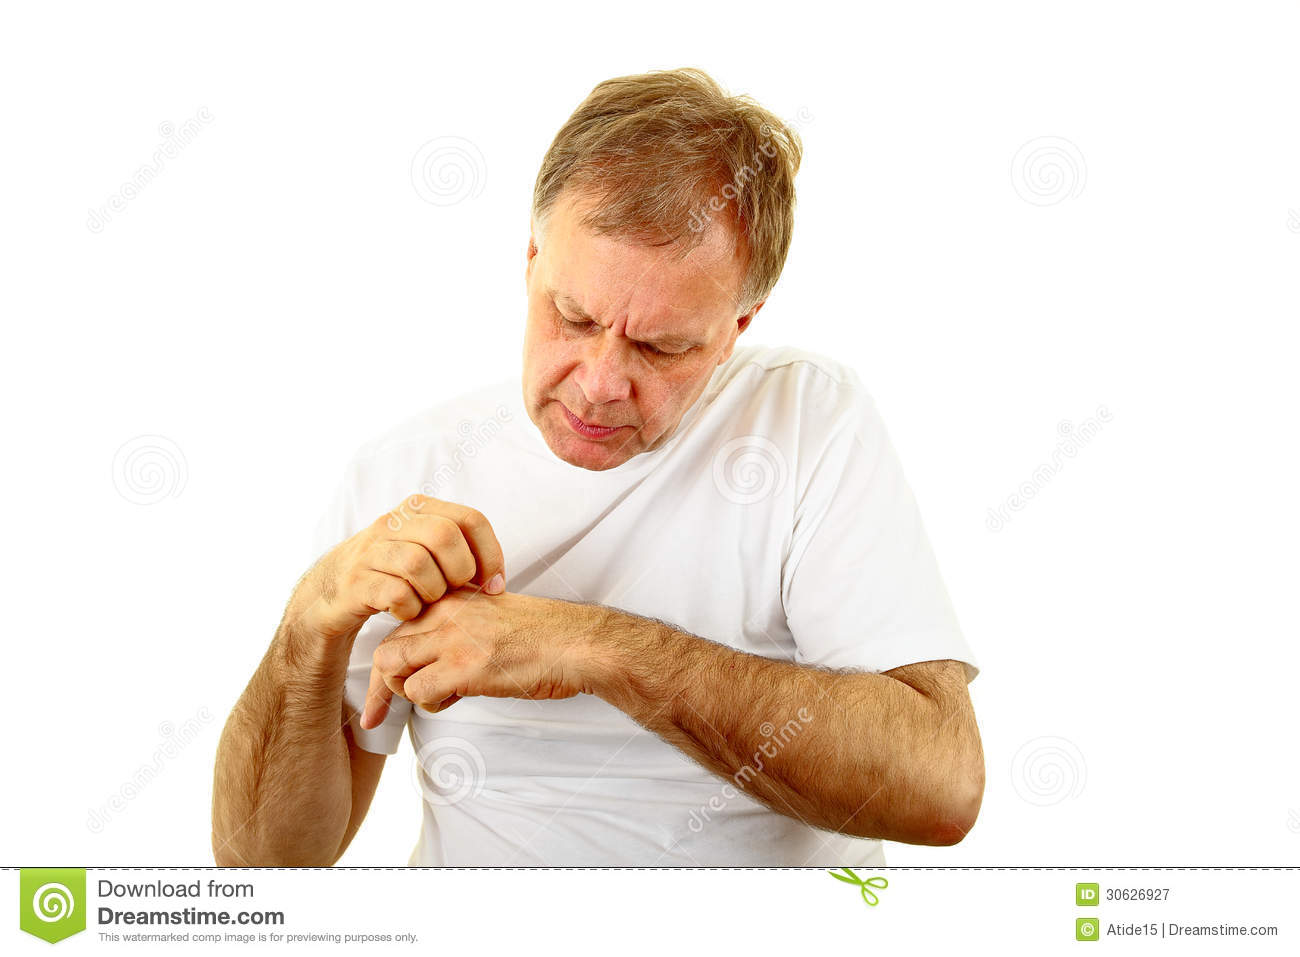 Itching Portrait Adult Man Scratch His Itchy Hand 30626927 Jpg